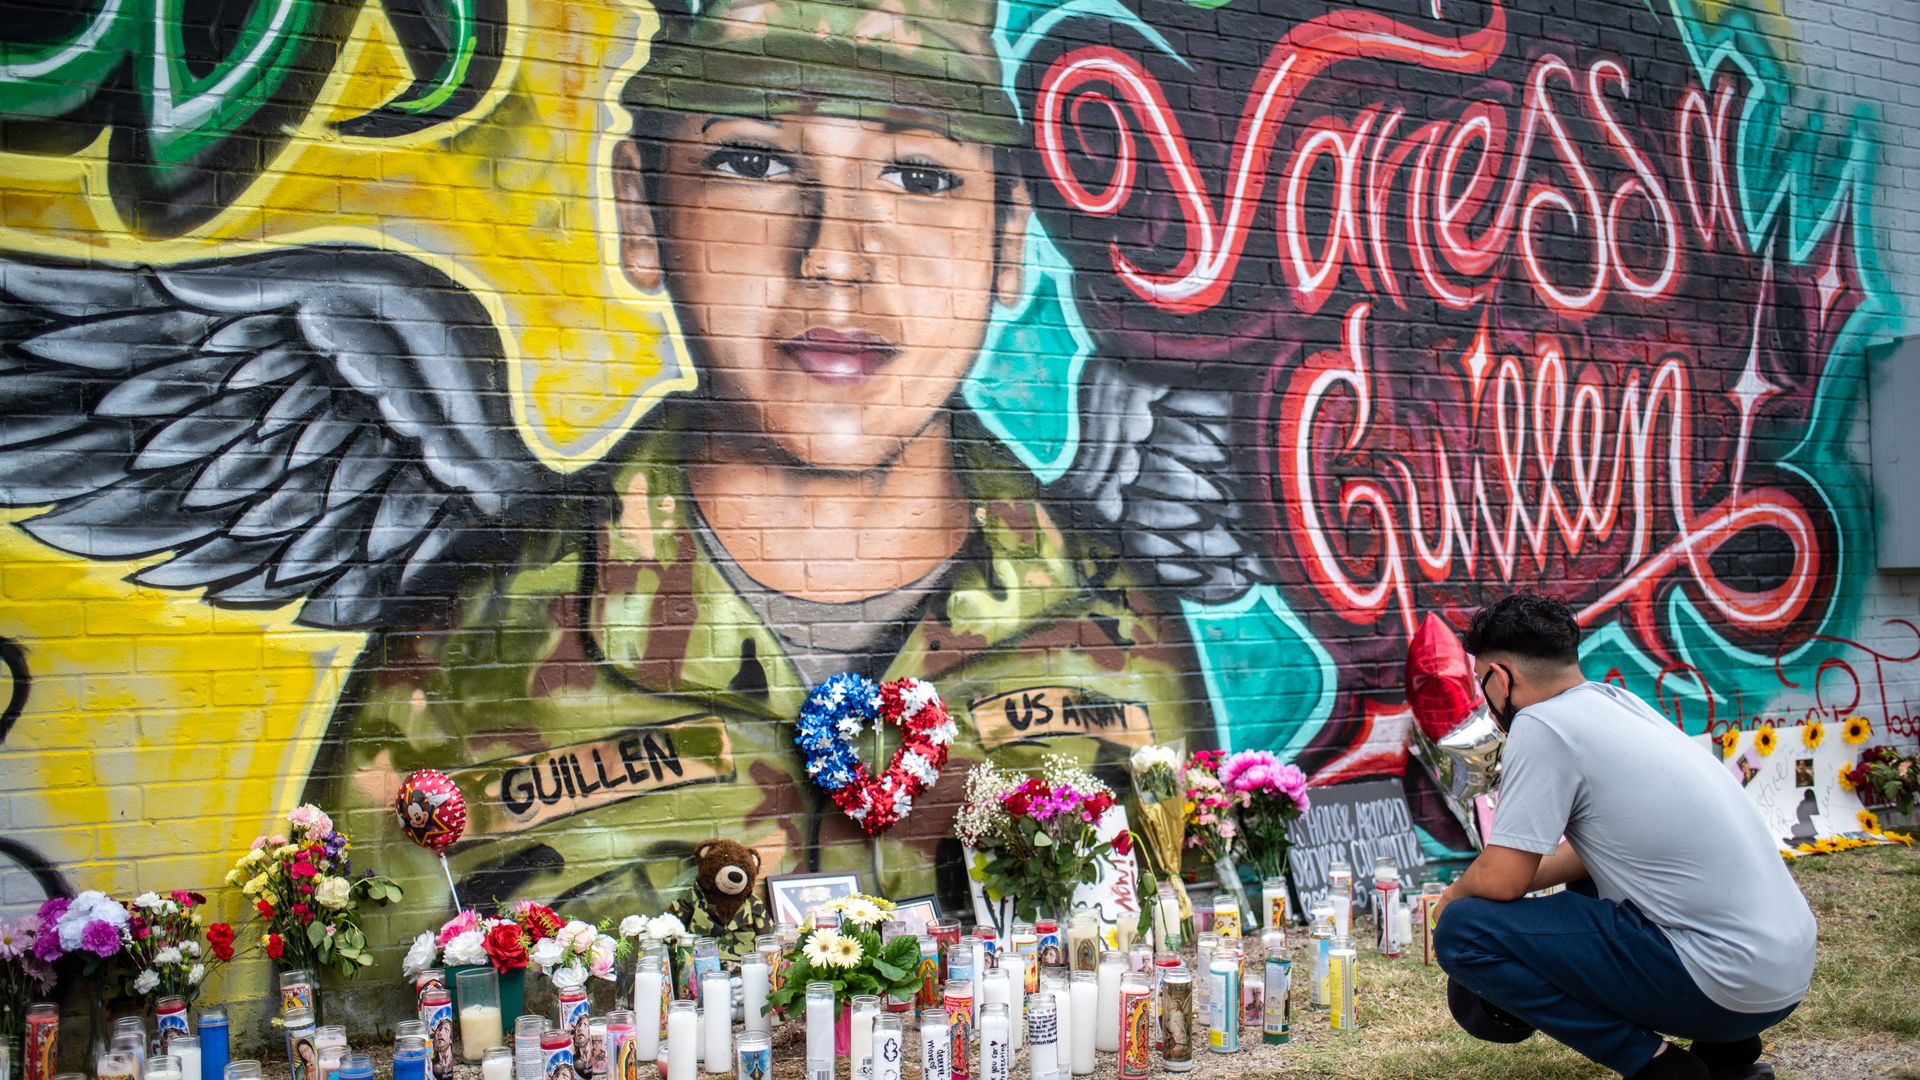 People pay respects at a mural of Vanessa Guillen, a soldier based at nearby Fort Hood on July 6